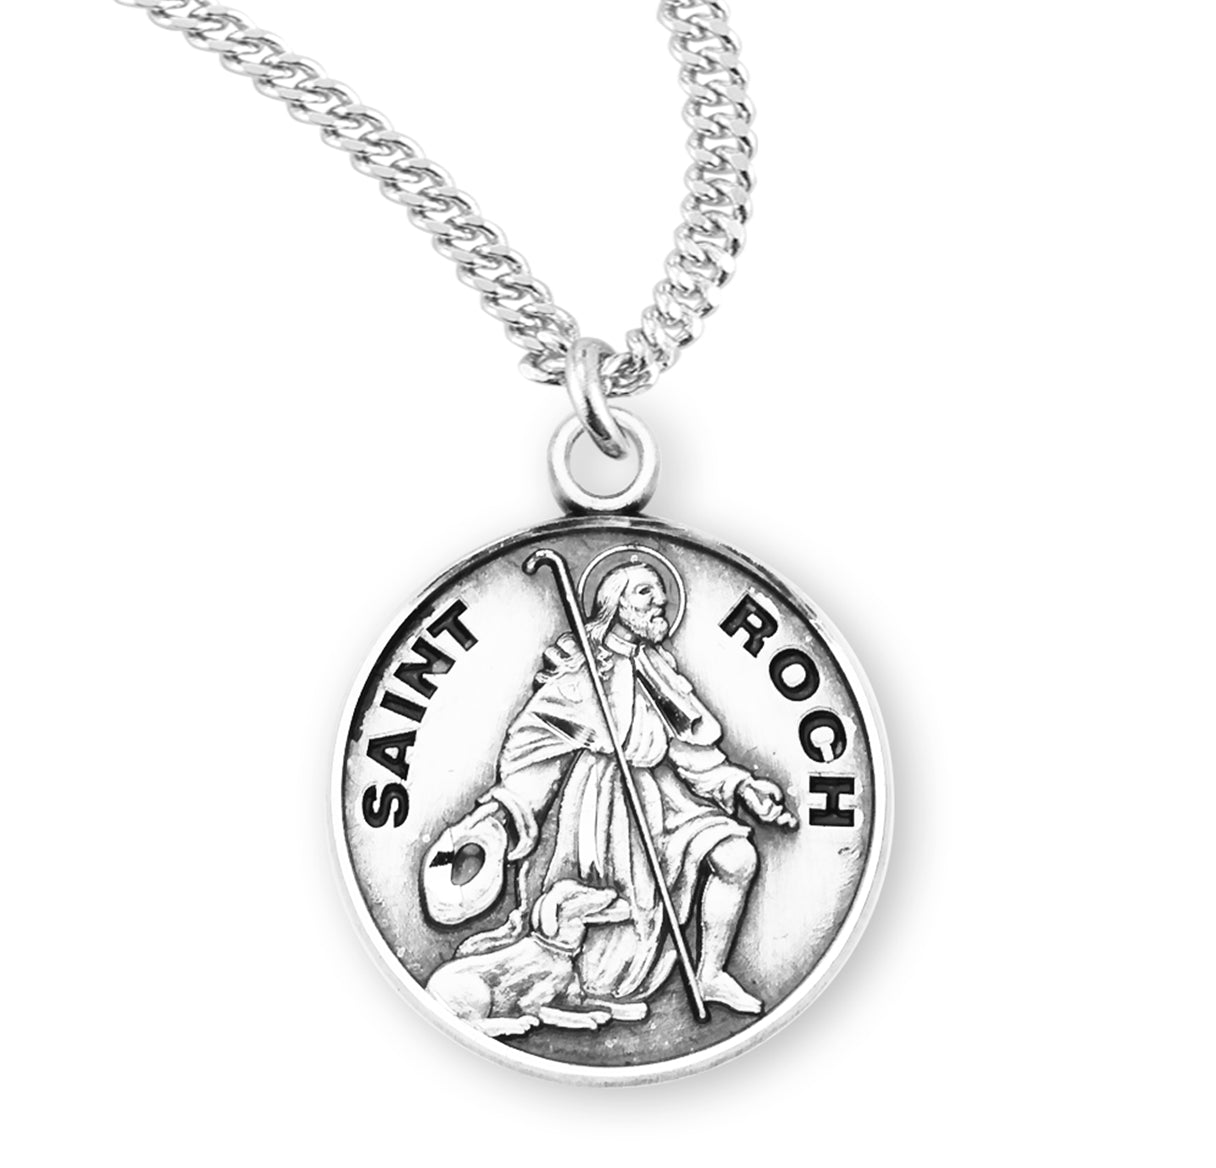 Patron Saint Roch Round Sterling Silver Medal